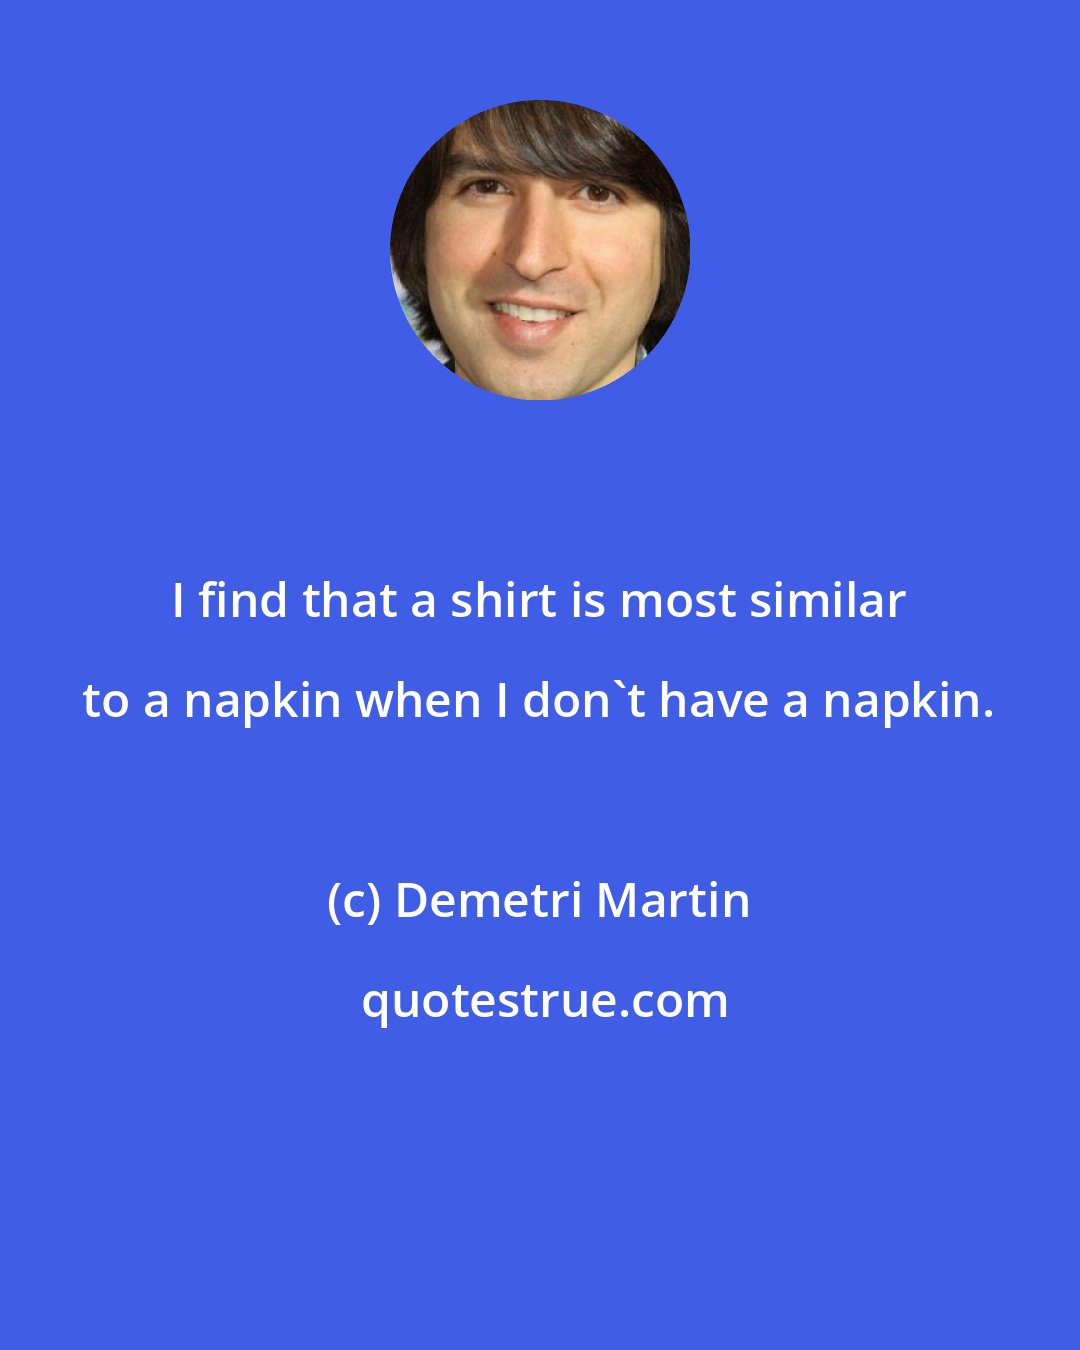 Demetri Martin: I find that a shirt is most similar to a napkin when I don't have a napkin.